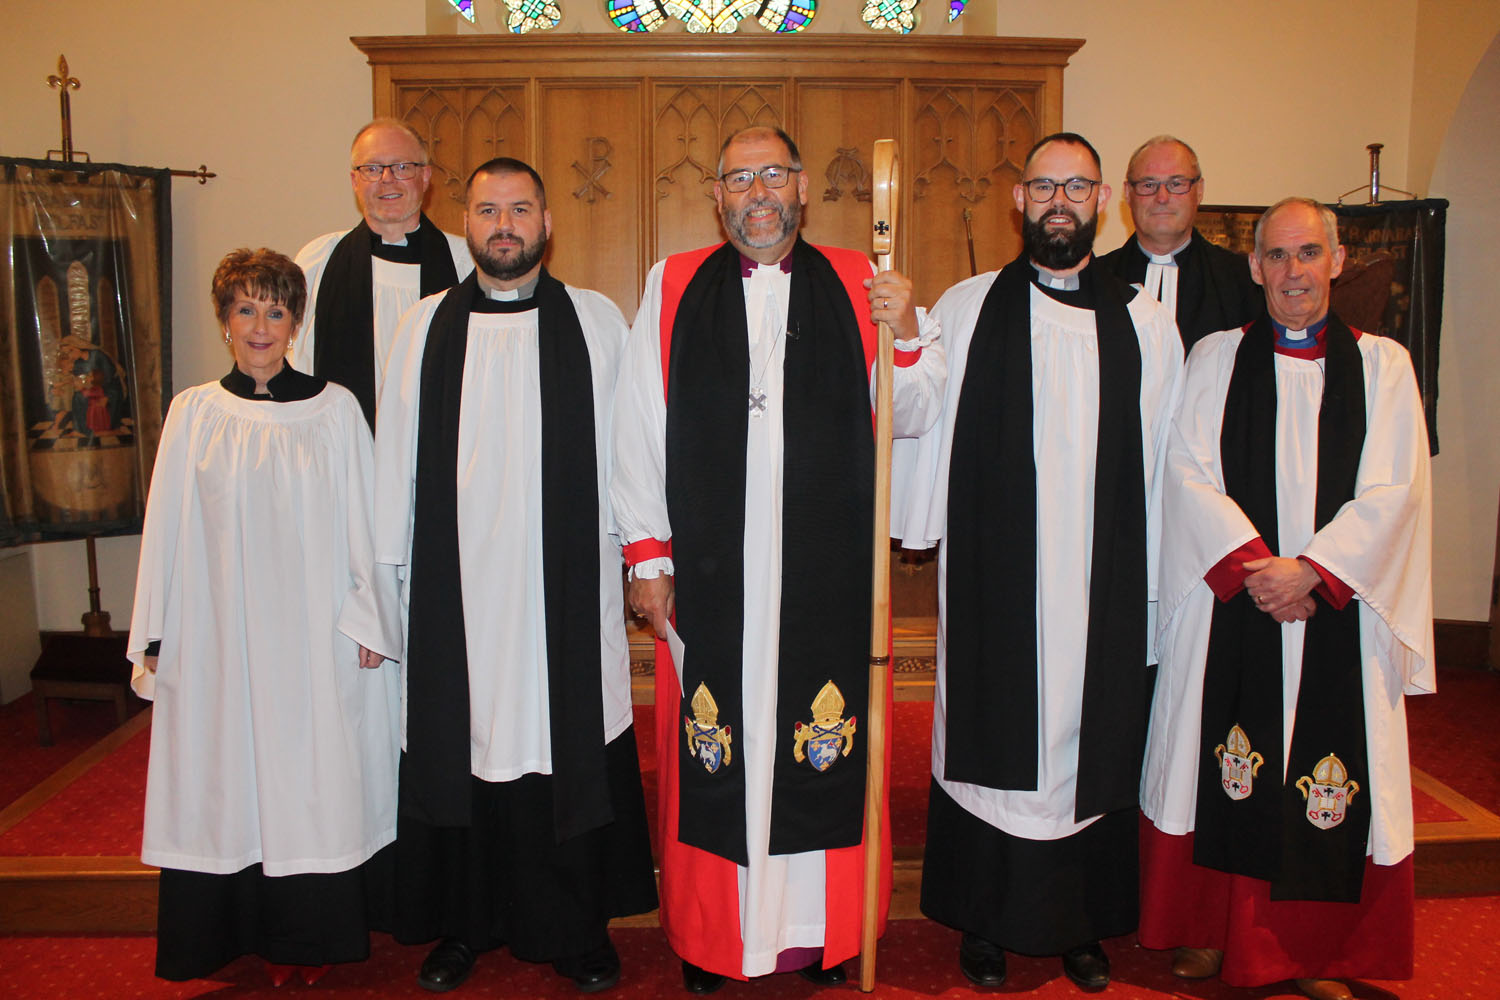 Parish reader Kate Crothers and clergy pictured at the Service of Introduction and Licensing.